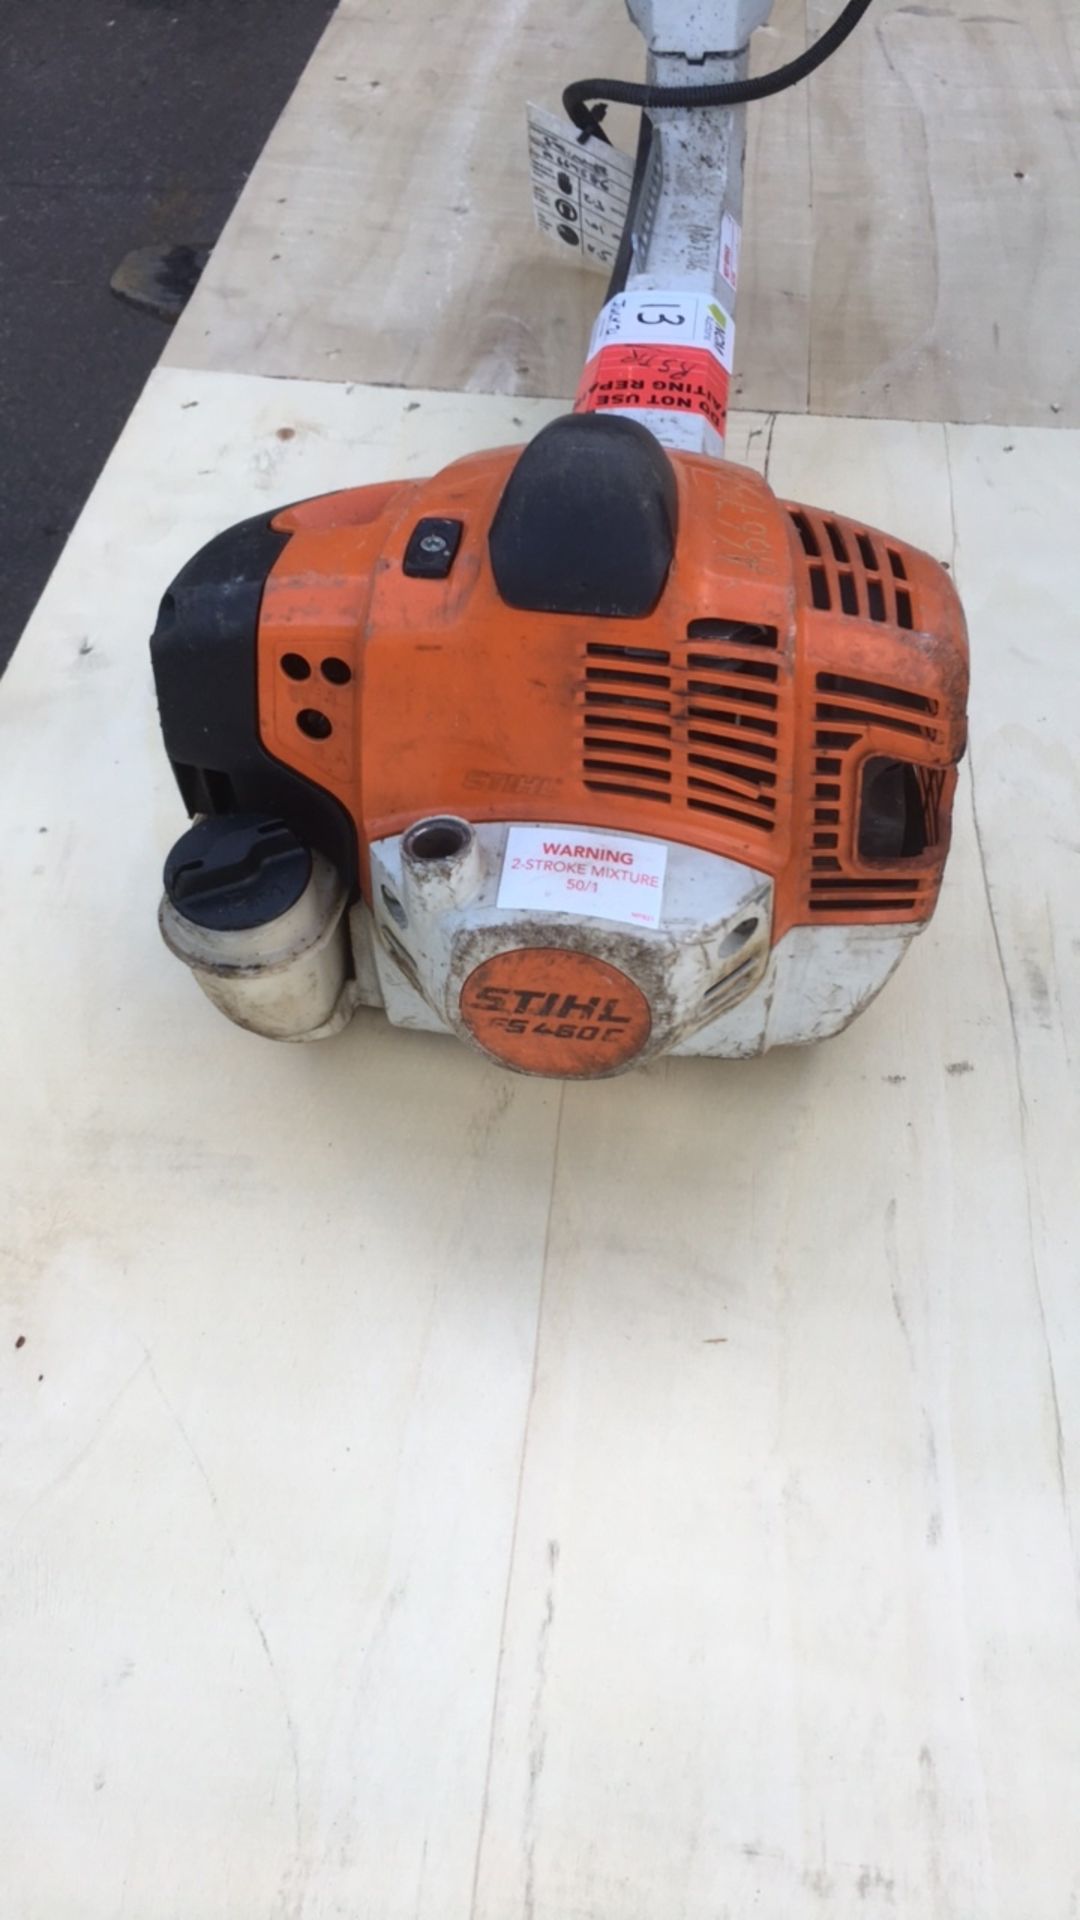 Stihl FS460 C trimmer (A667586) - Image 4 of 4